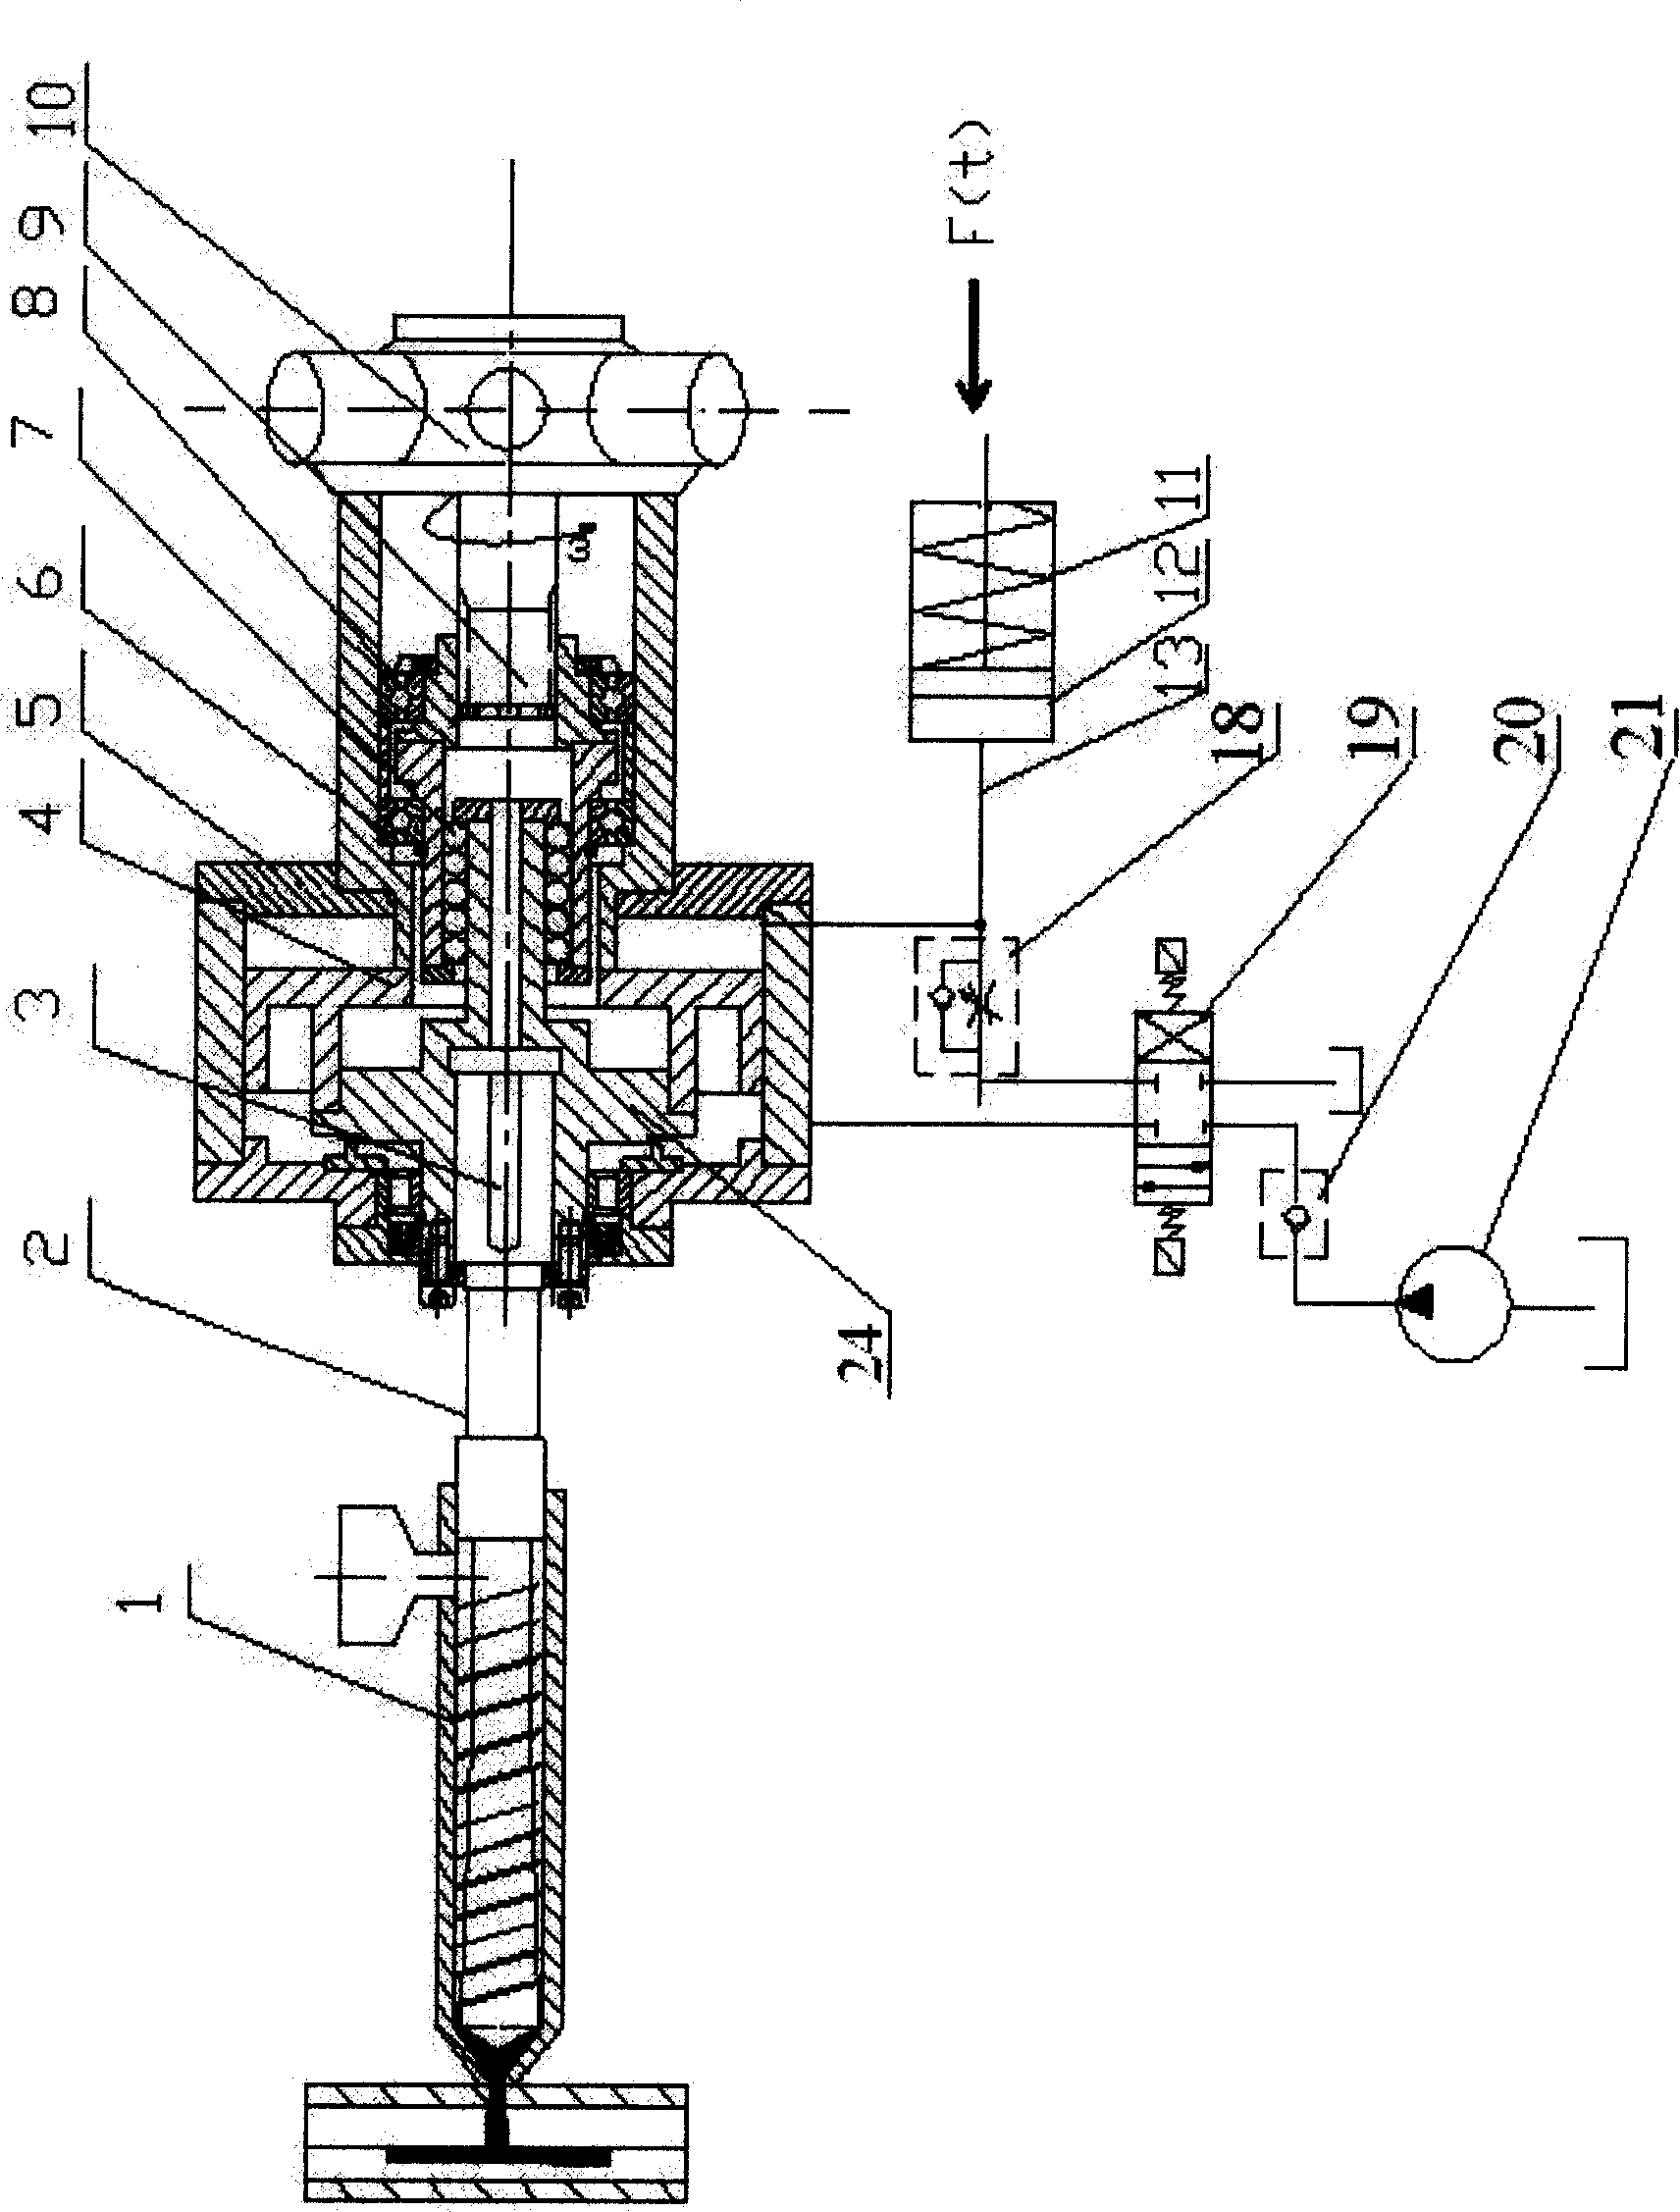 Injector screw axial pulse displacement method and apparatus